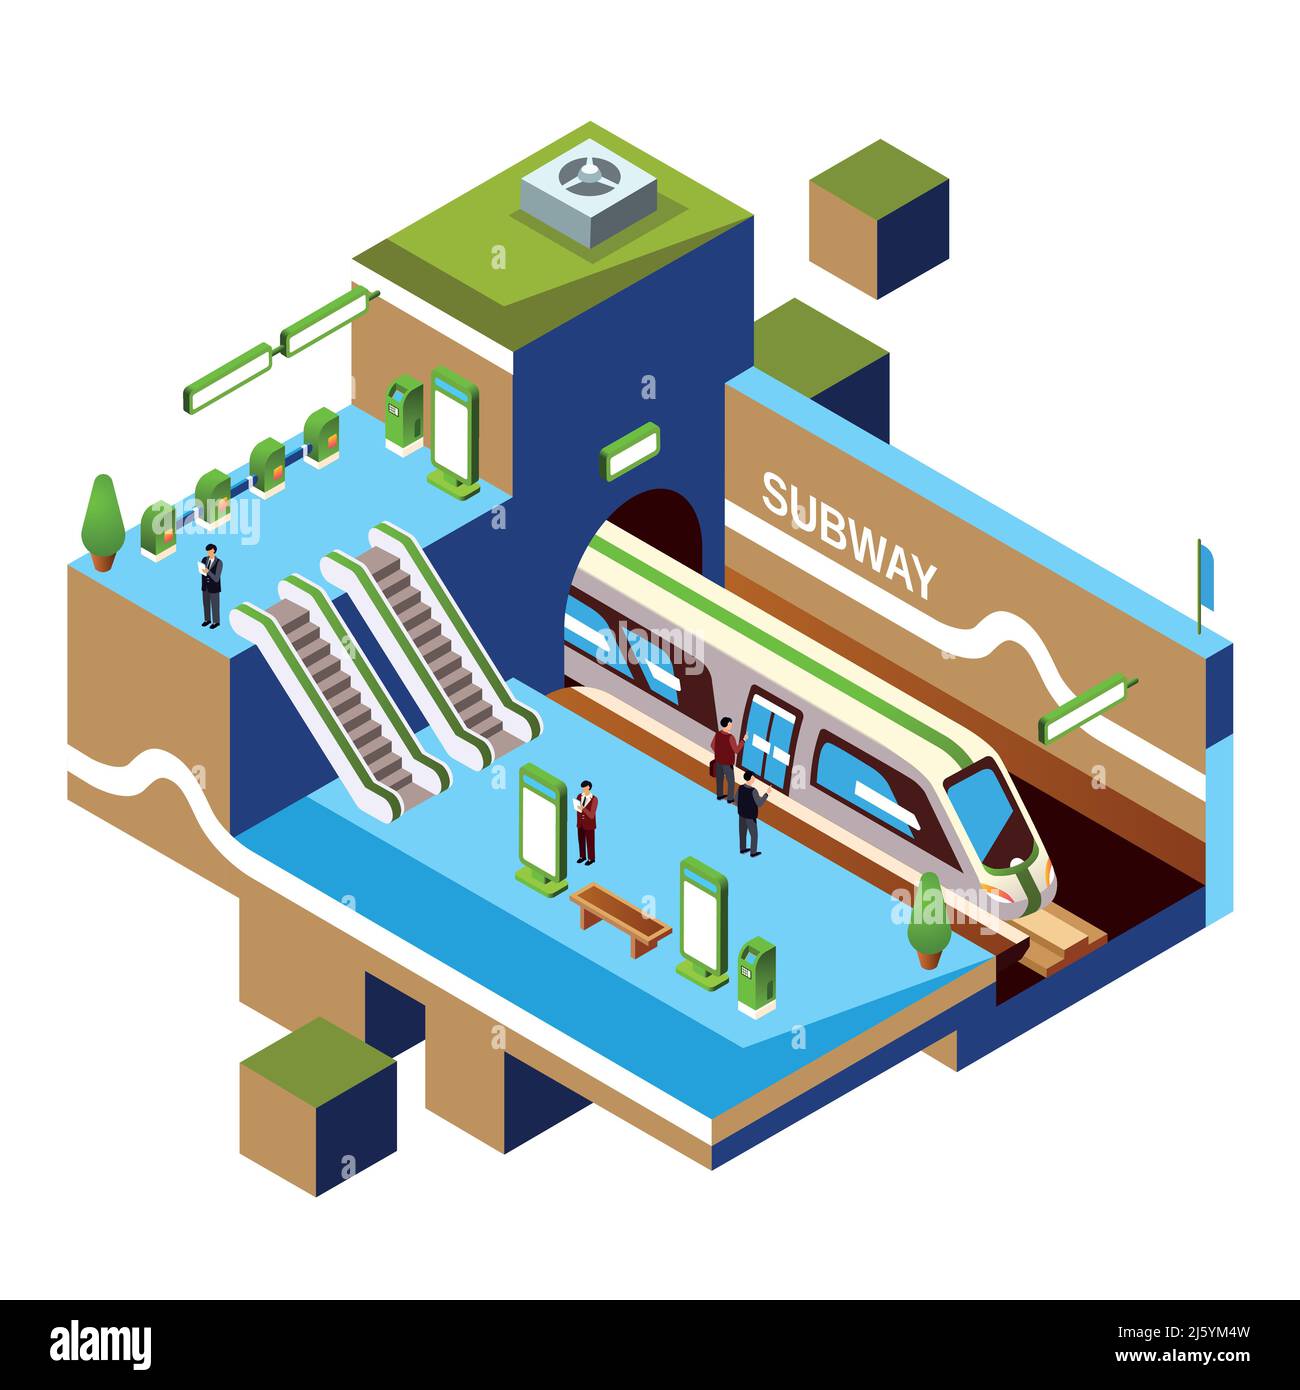 Vector isometric subway station cross-section concept. Metro or underground platform interior objects - escalators and benches, modern passenger train Stock Vector